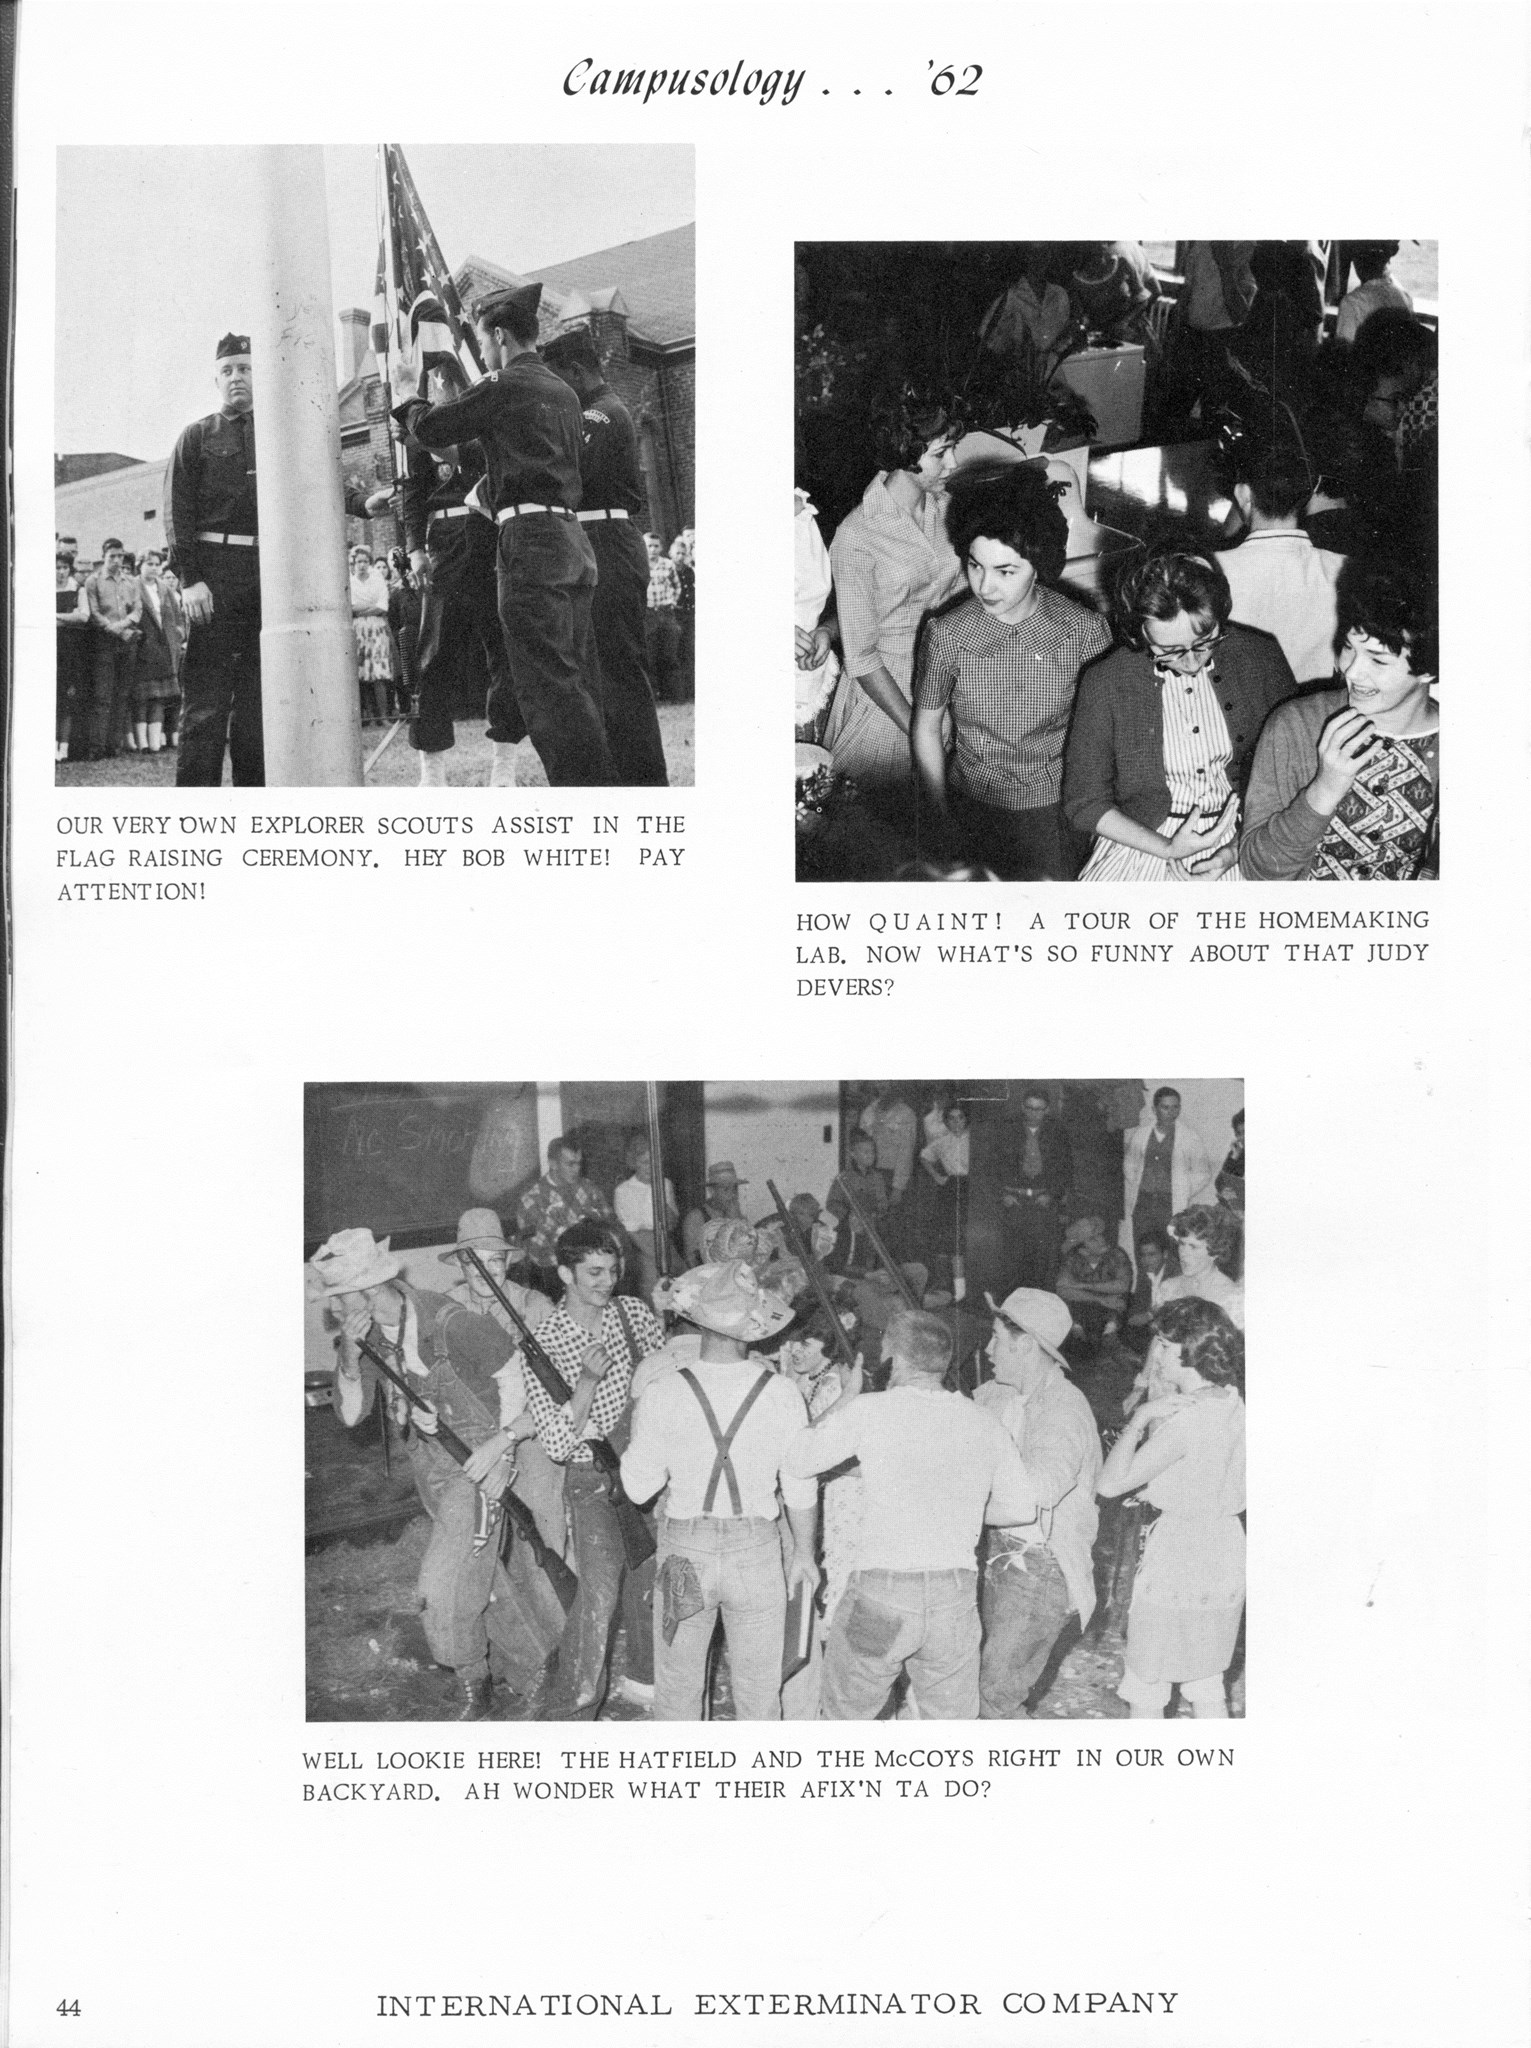 ../../../Images/Large/1962/Arclight-1962-pg0044.jpg